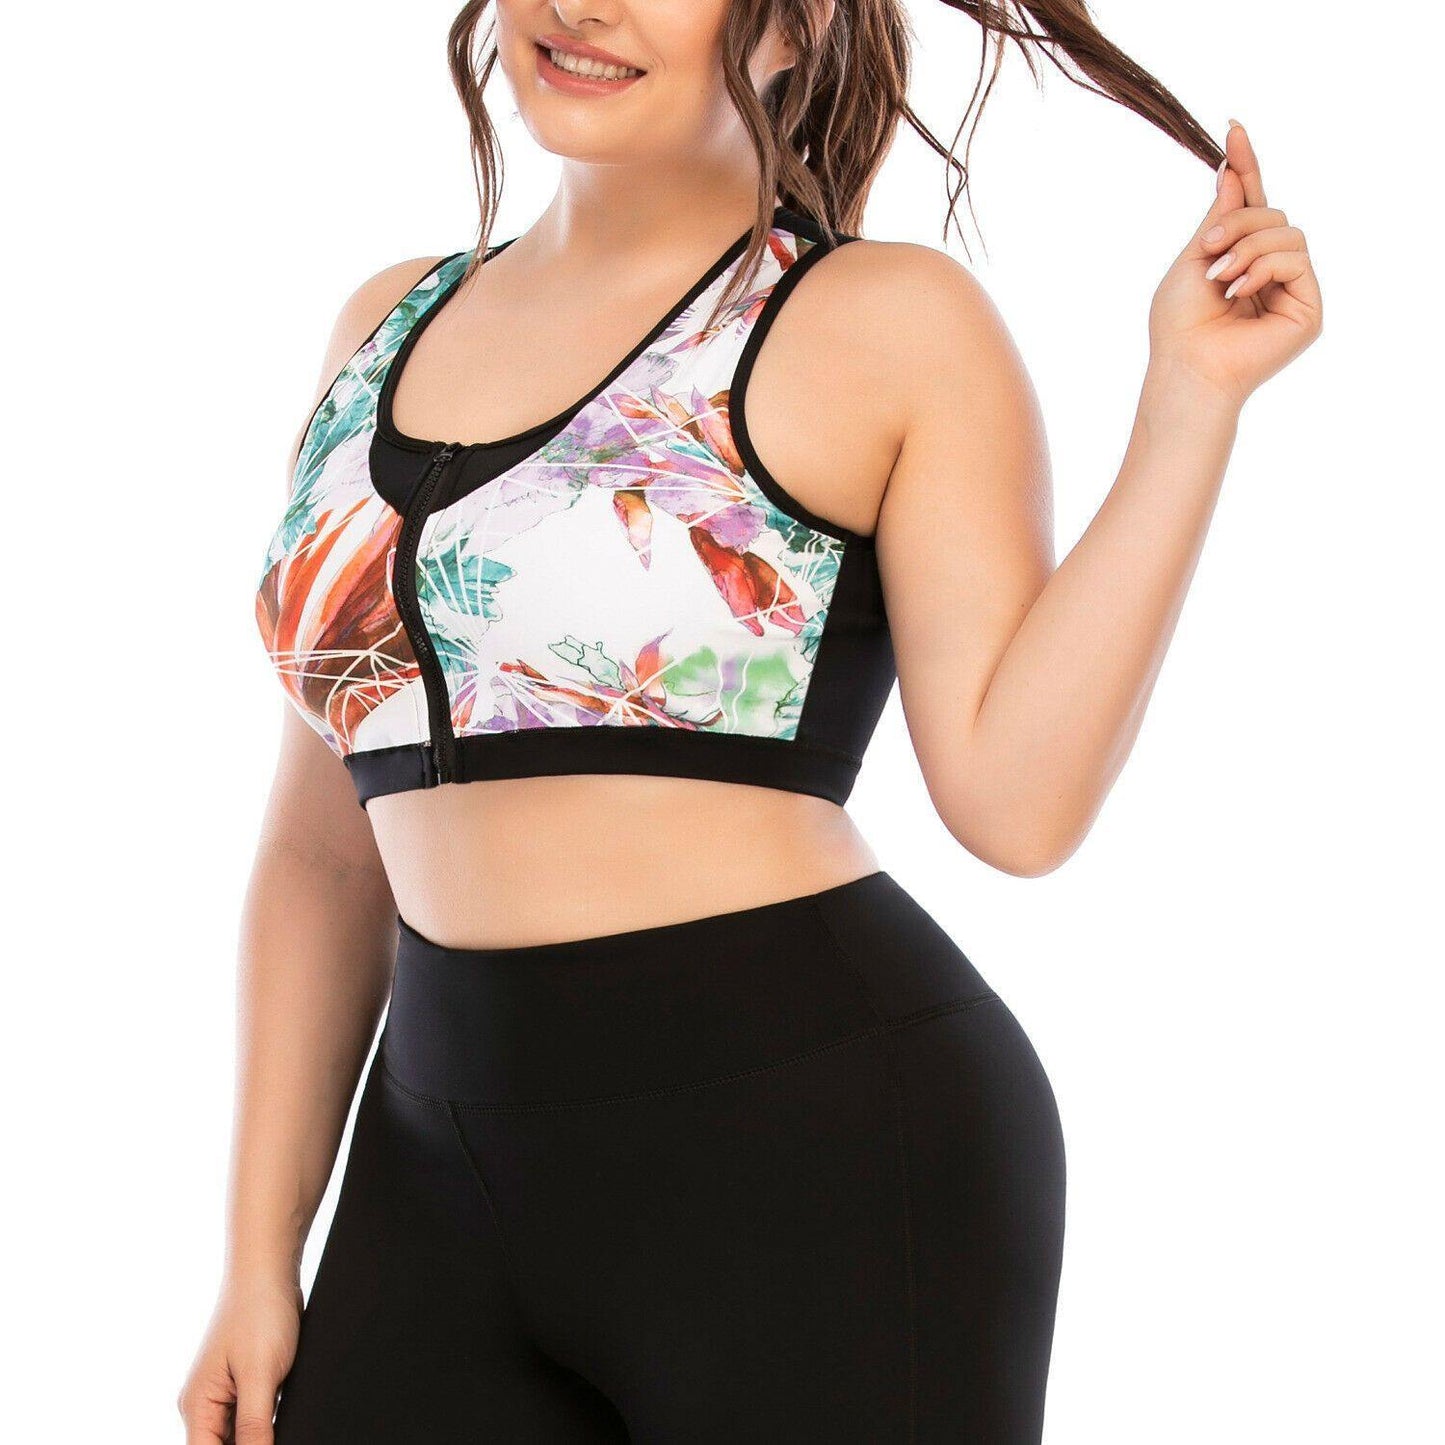 Women's Plus Size Yoga Set Fitness Gym Running Sports Outfit-STYLEGOING